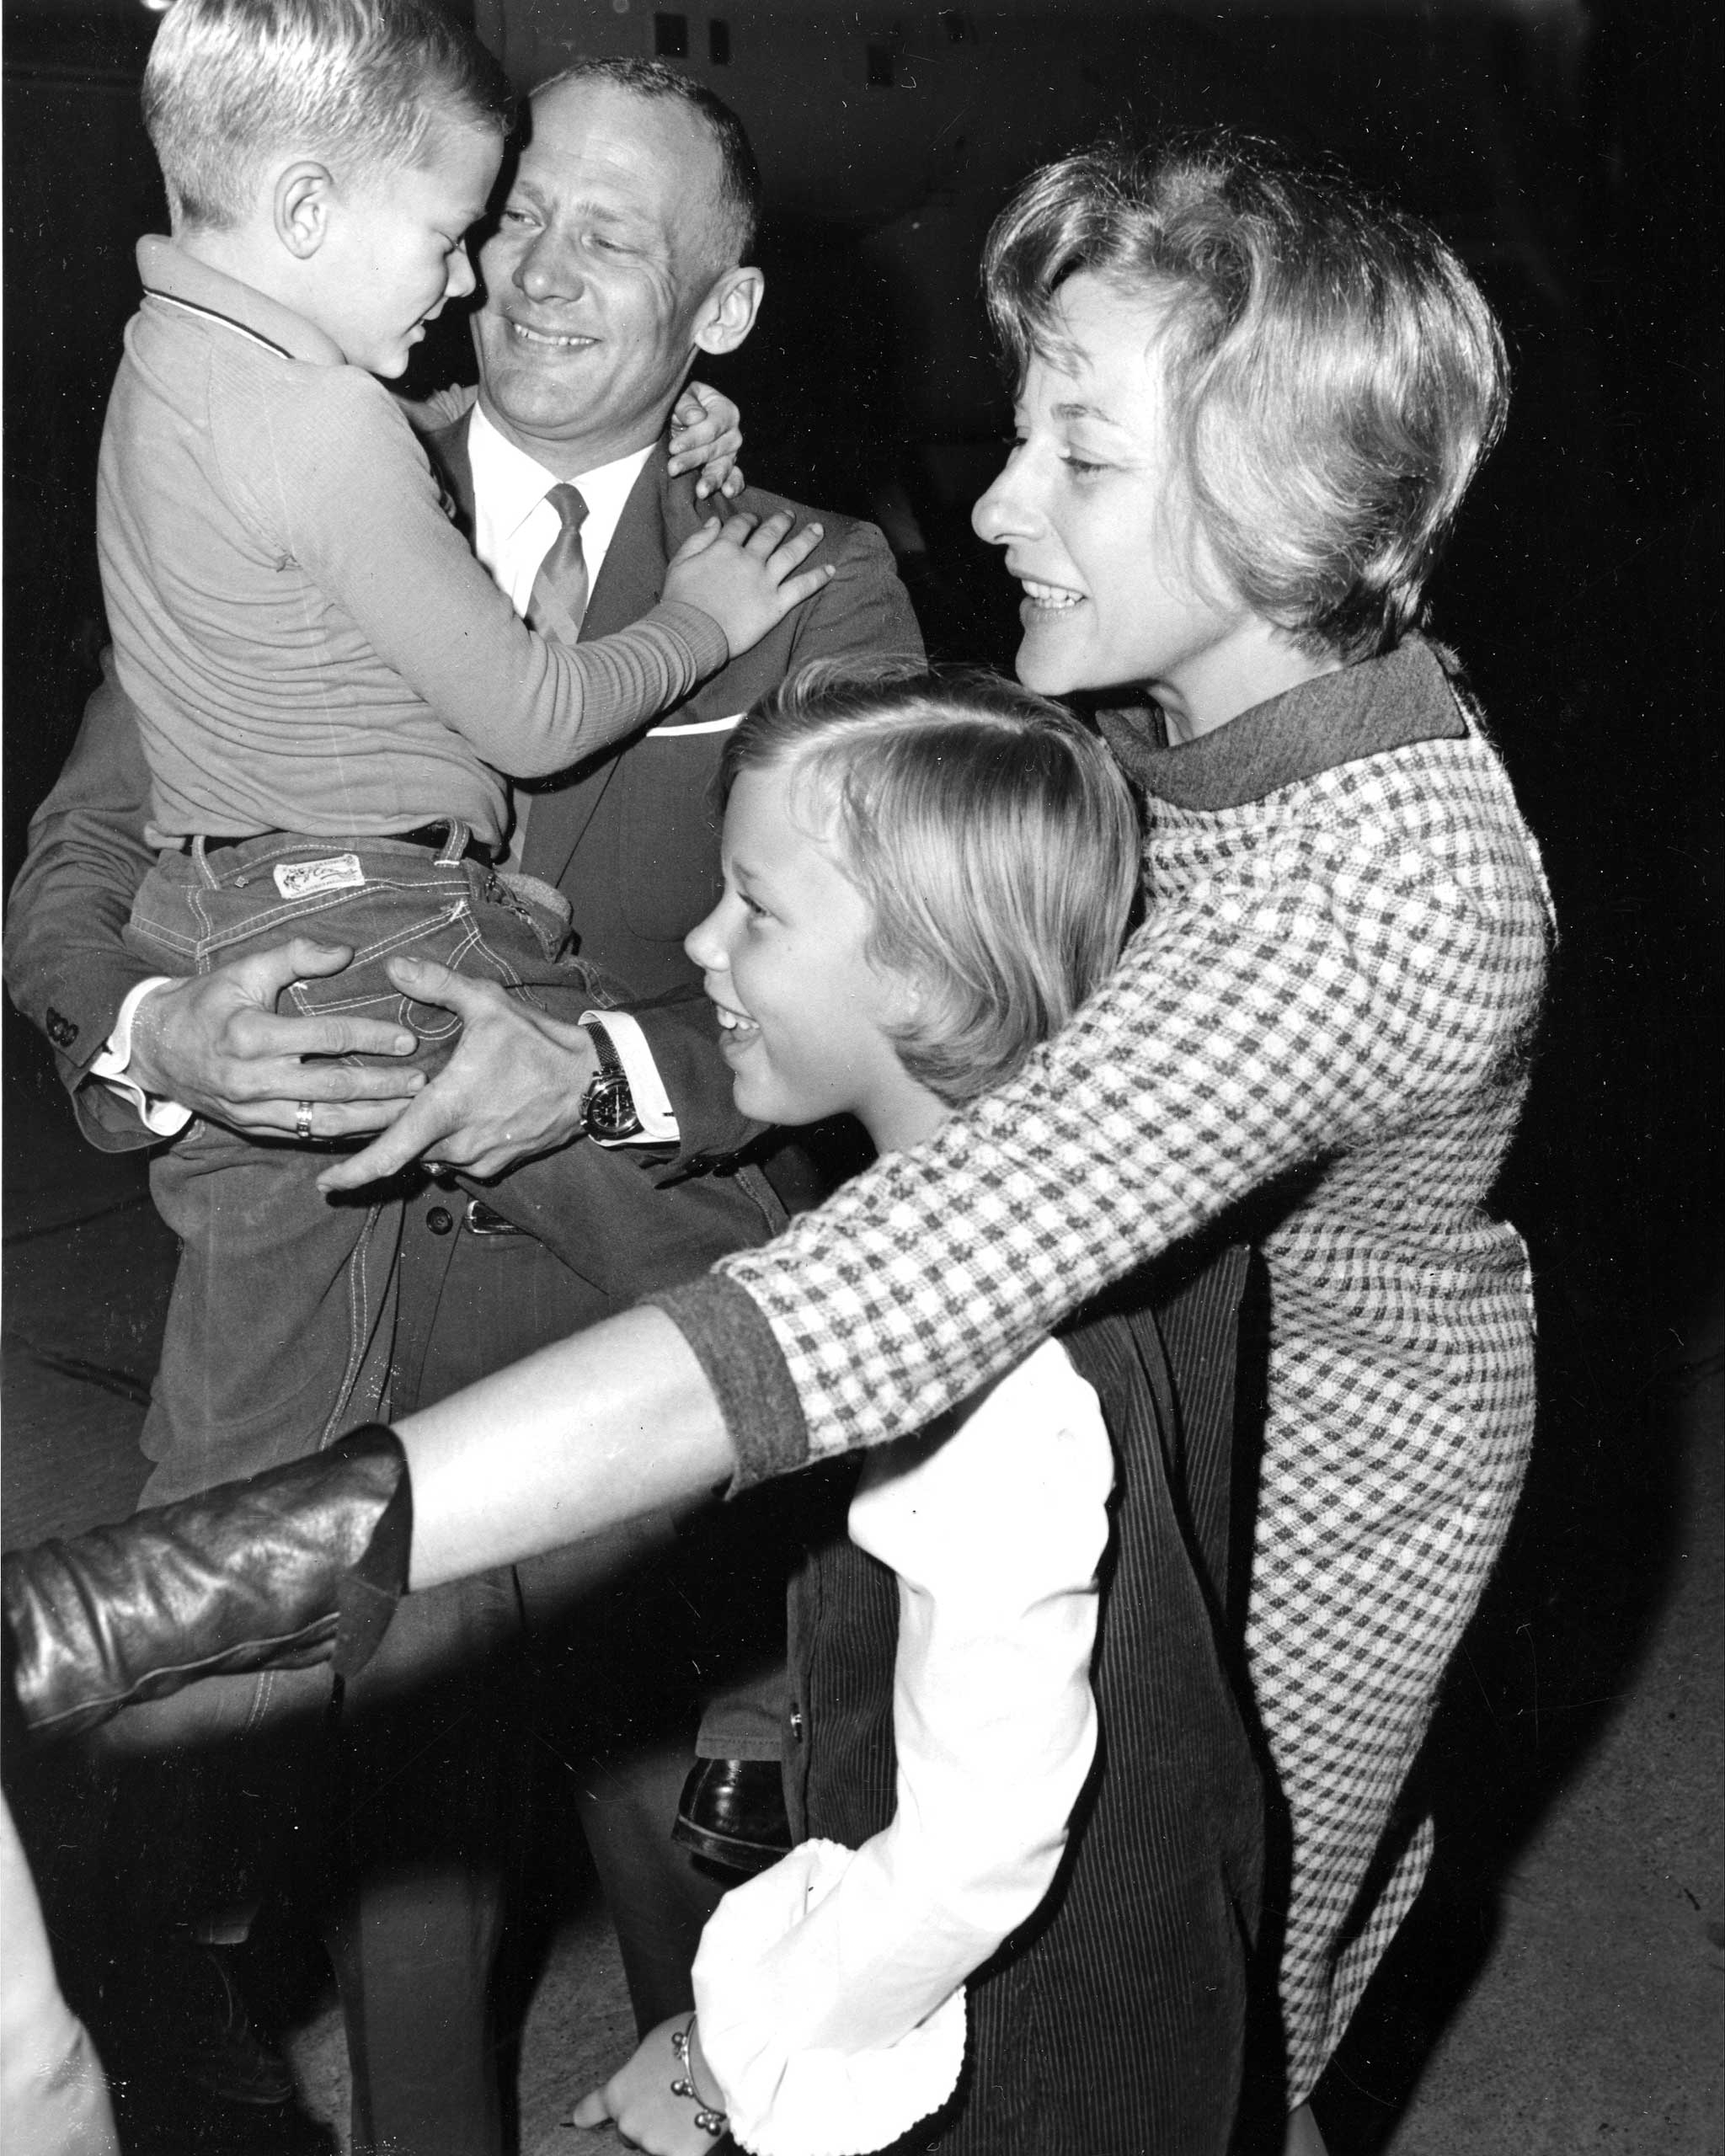 Aldrin has two sons and one daughter. A few days after his return to Earth from Gemini 12, he was reunited with his family at the Space Center in Houston on  Nov. 19, 1966.